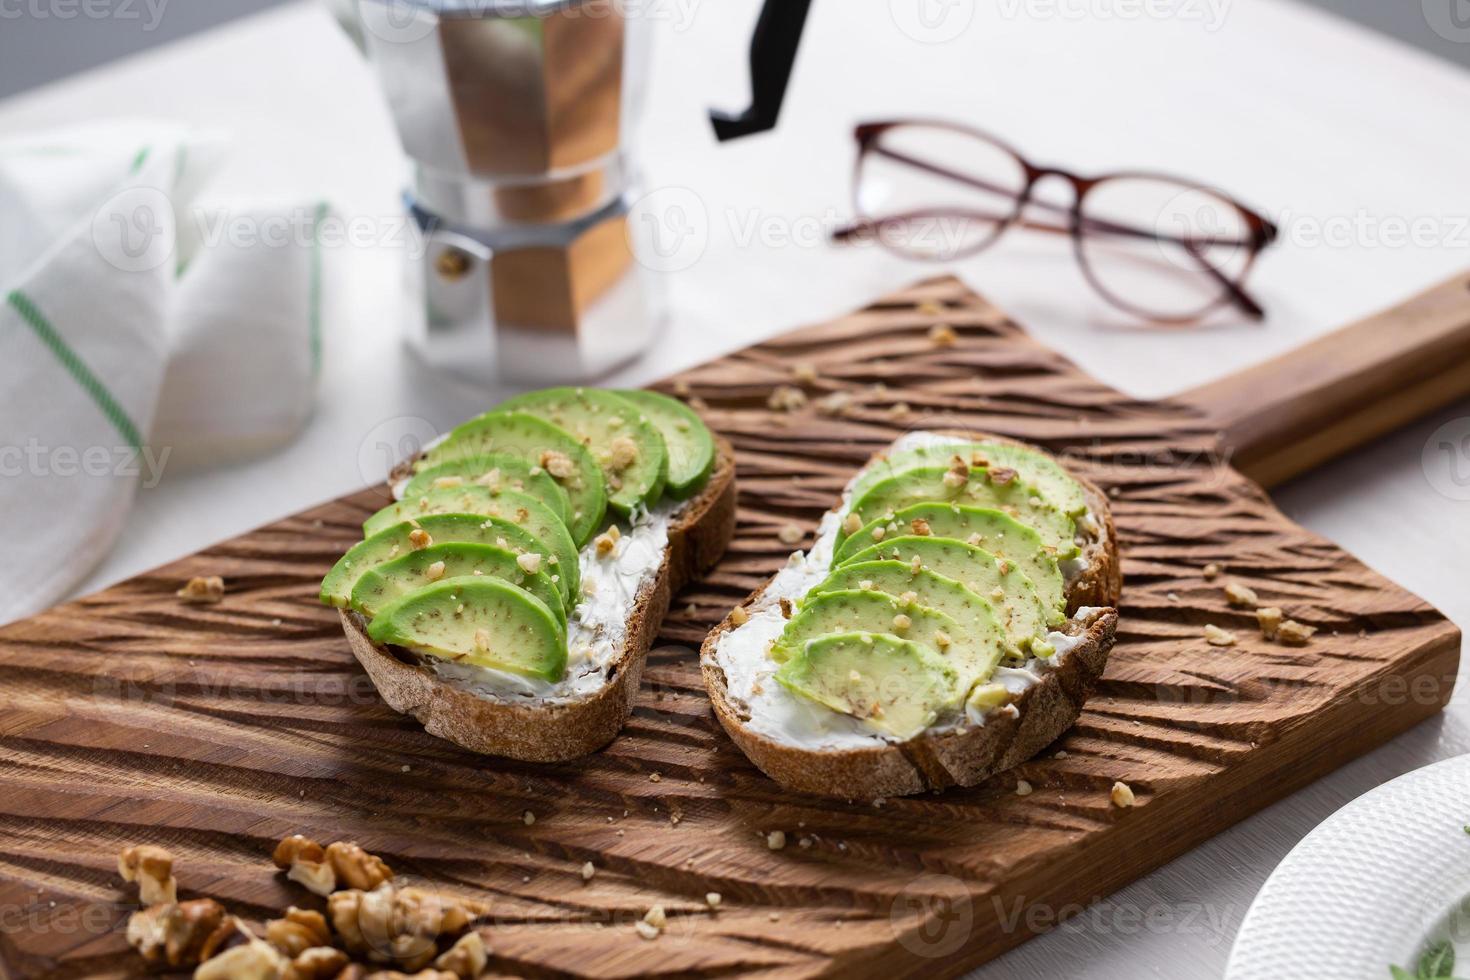 Sliced avocado on toast bread with nuts. Breakfast and healthy food concept. photo